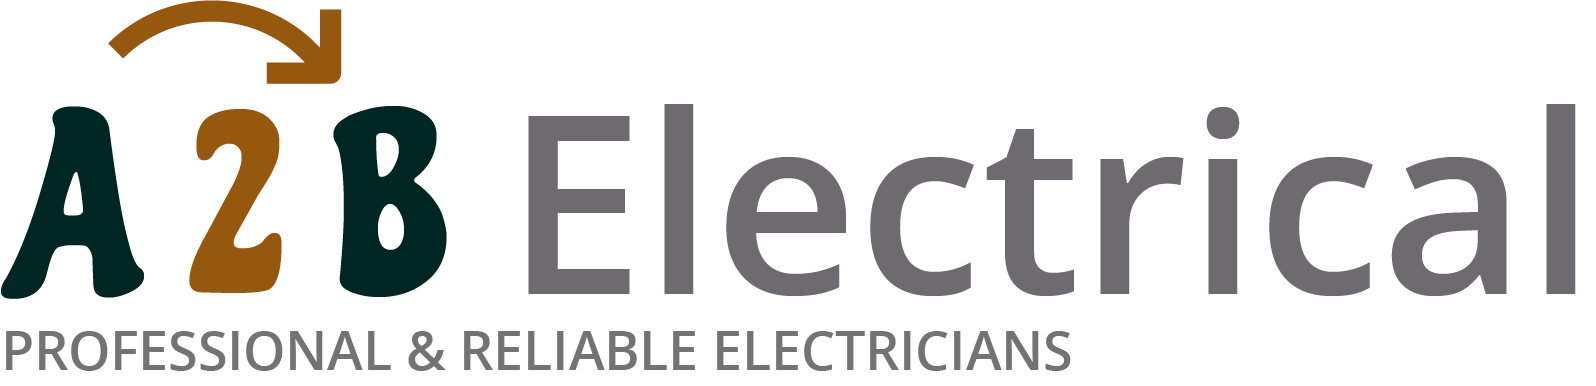 If you have electrical wiring problems in Market Drayton, we can provide an electrician to have a look for you. 